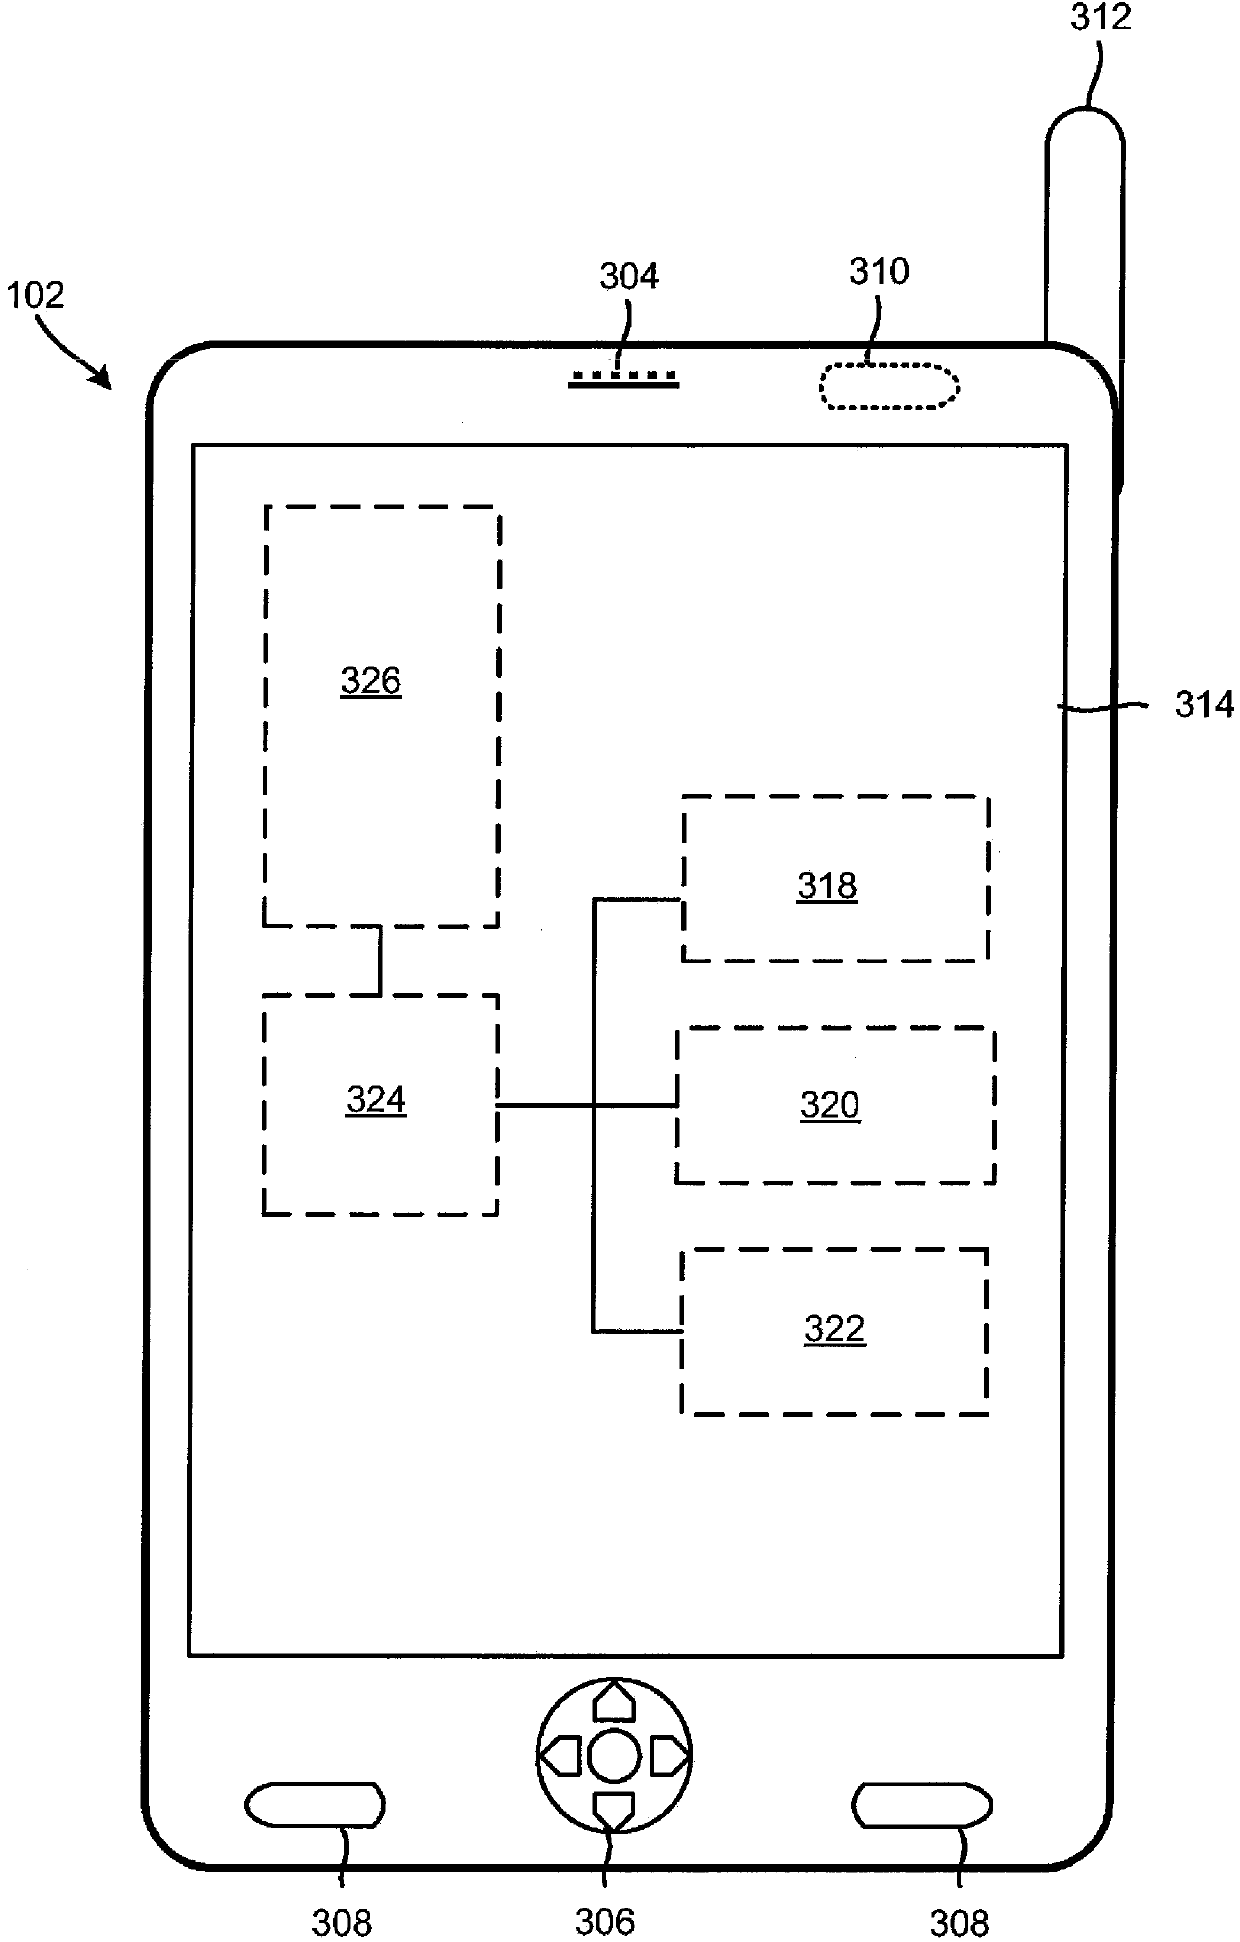 Method and System for Providing Enhanced Location Based Information for Wireless Handsets